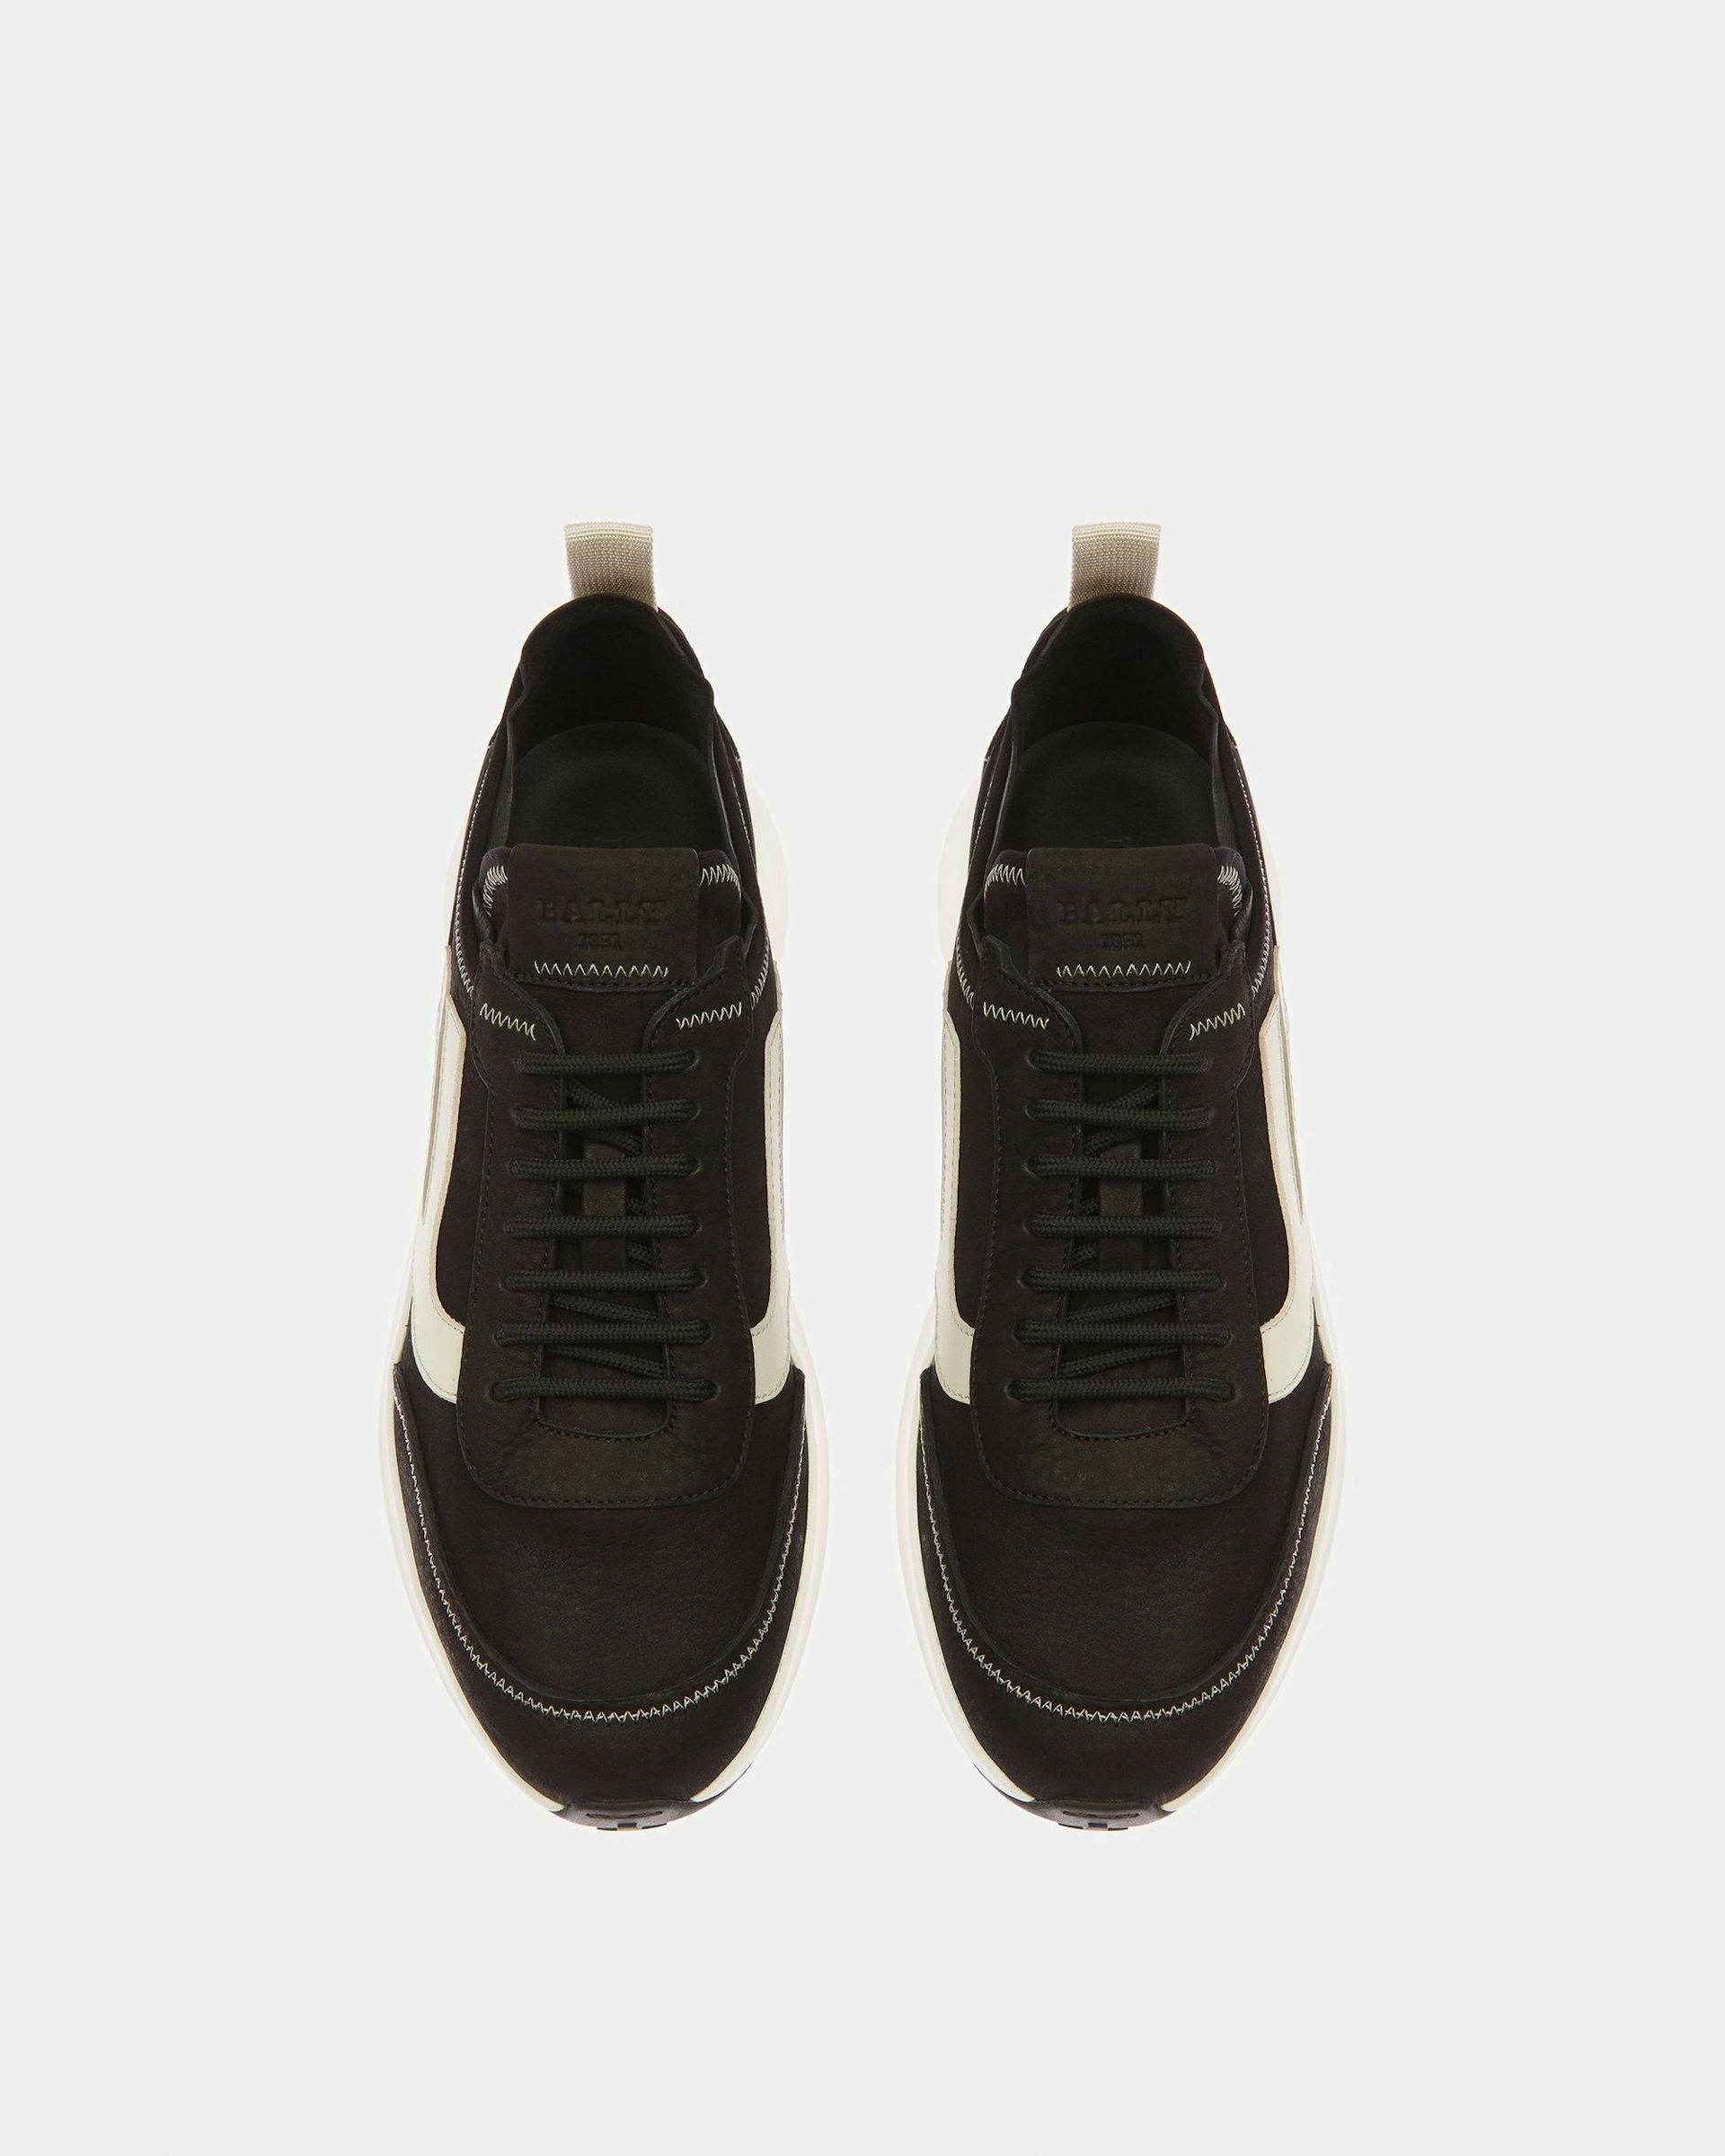 Darys Leather Sneakers In Black And Dusty White - Men's - Bally - 02